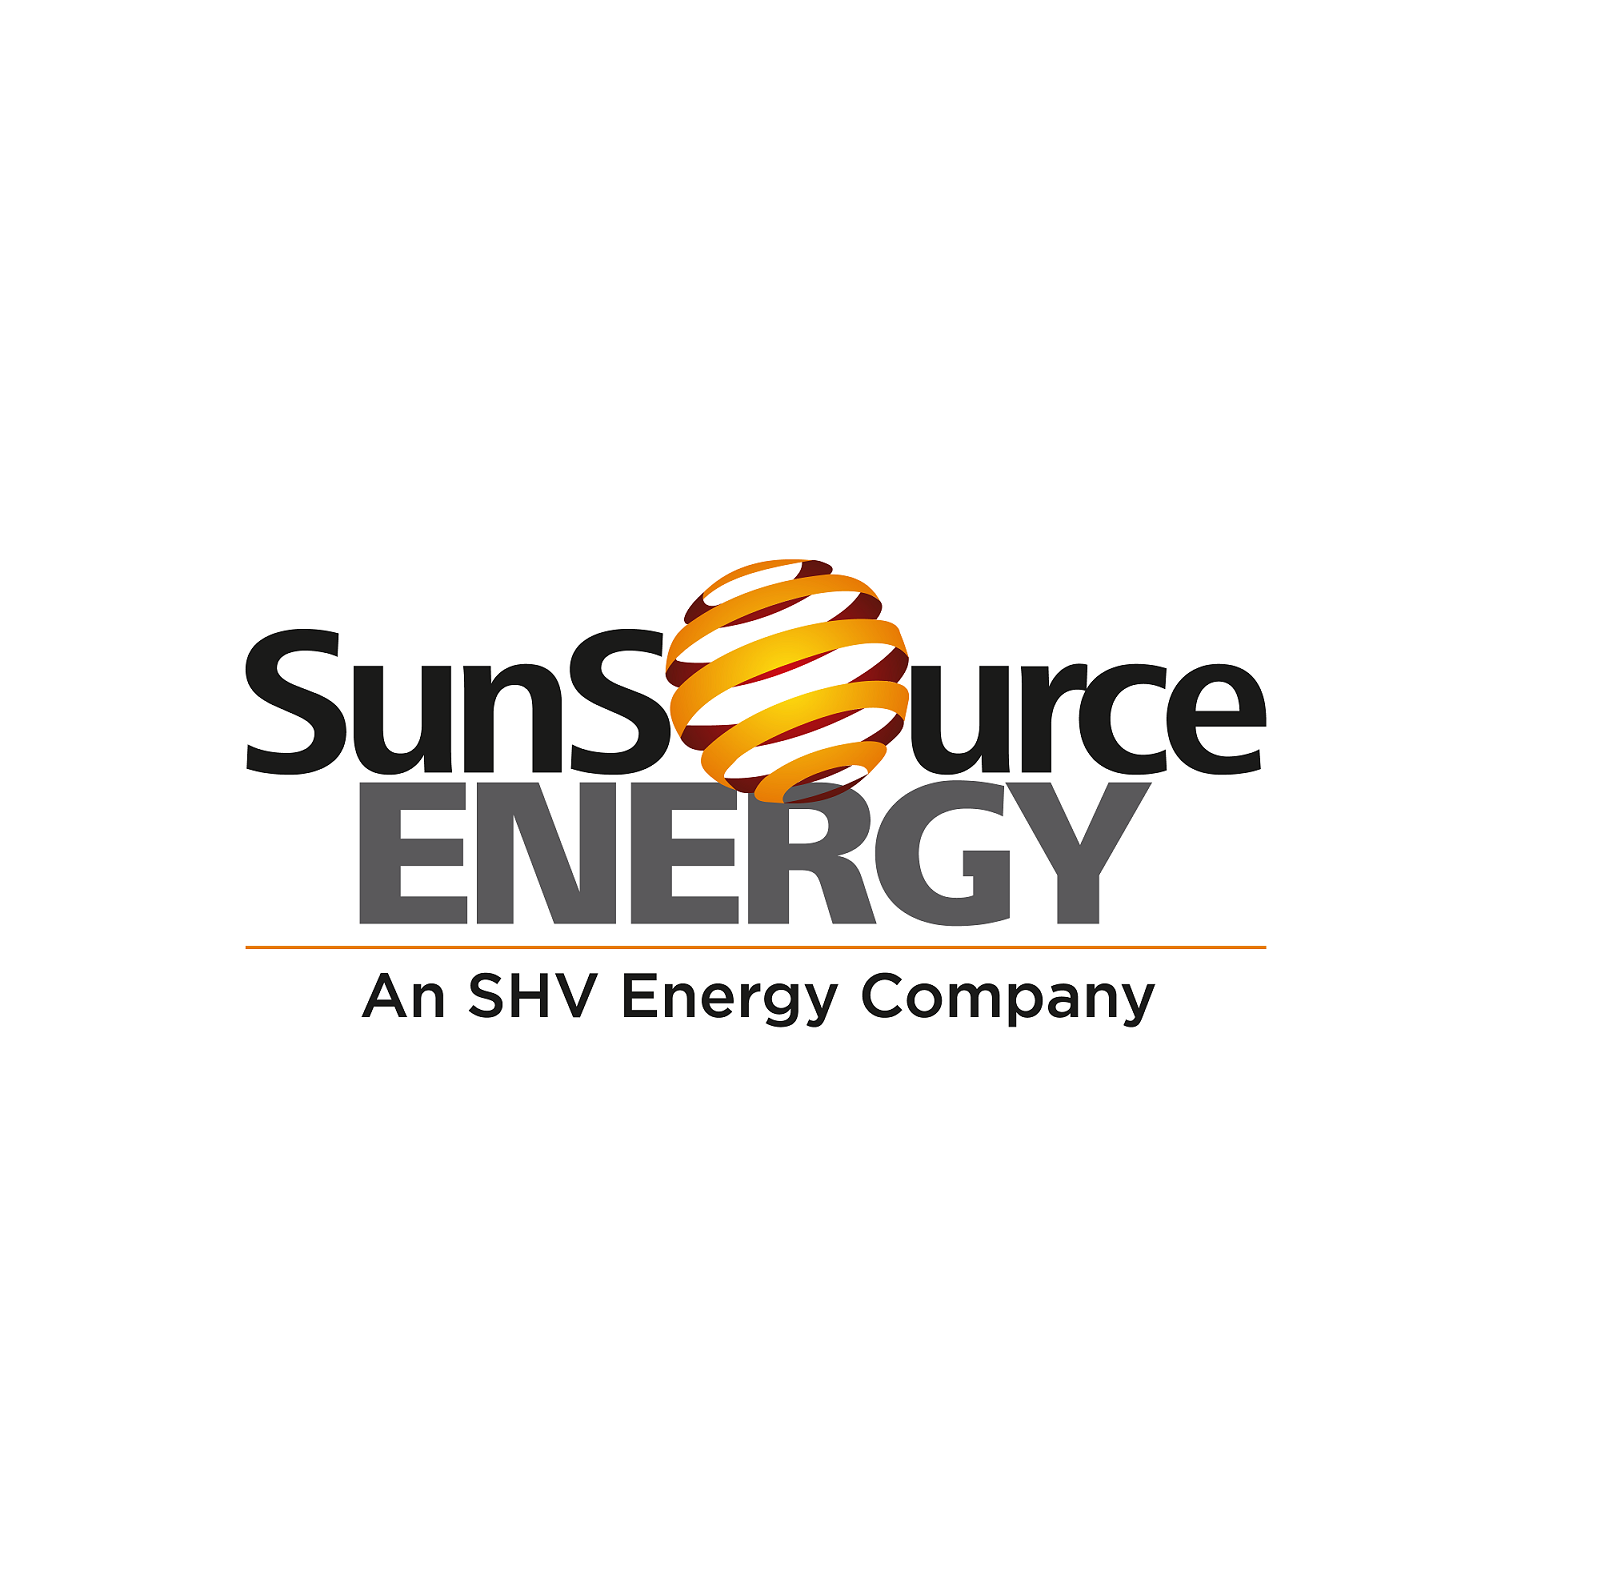 SunSource- An Independent Power Producer Revolutionizes Energy